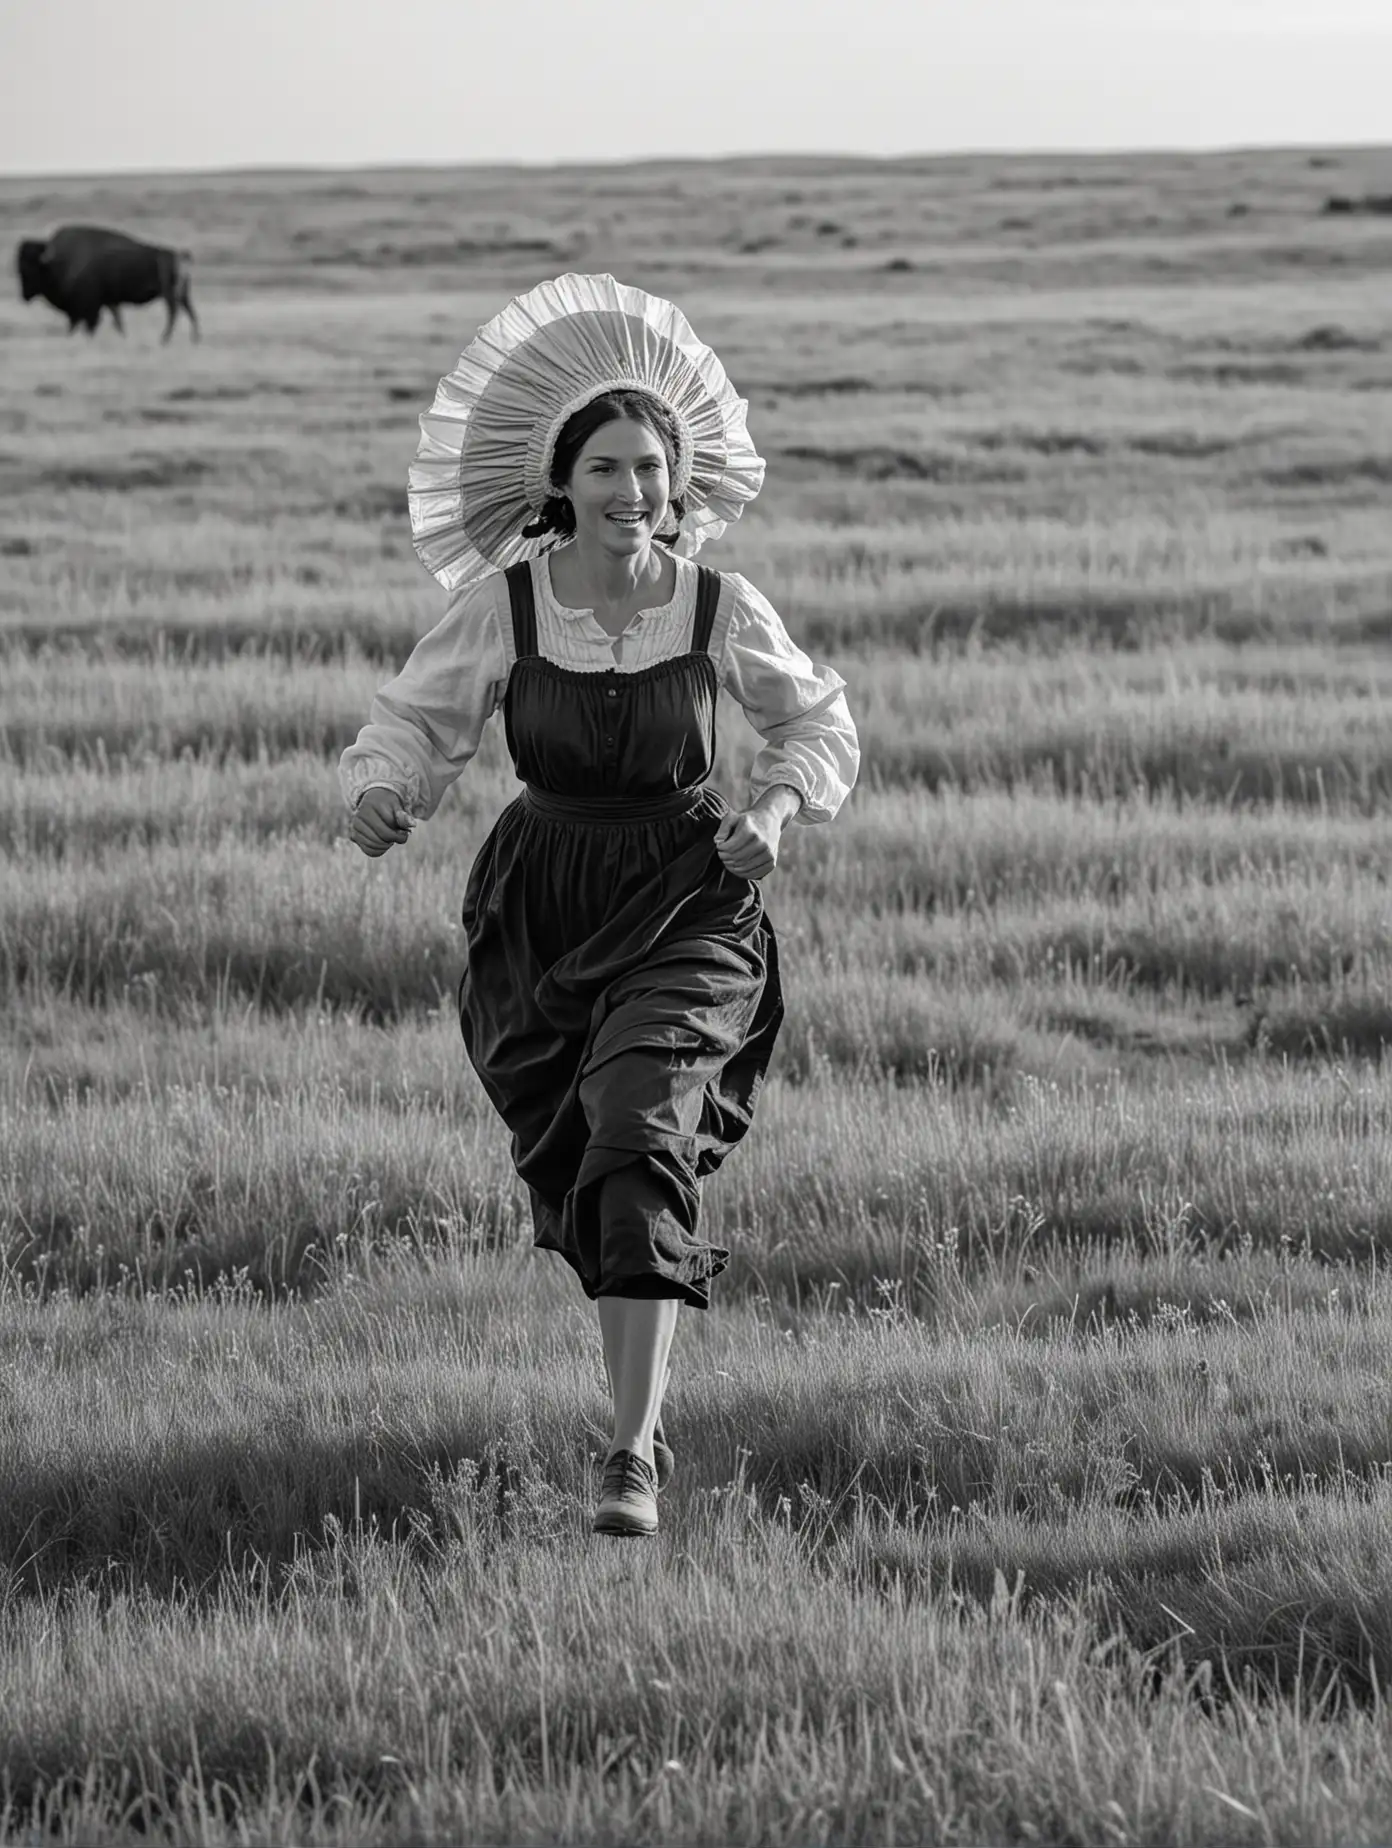 A woman runs through the prairie. She is a pioneer and wears a bonnet. There are buffalo in the background. she is seen from the side. In black and white. 